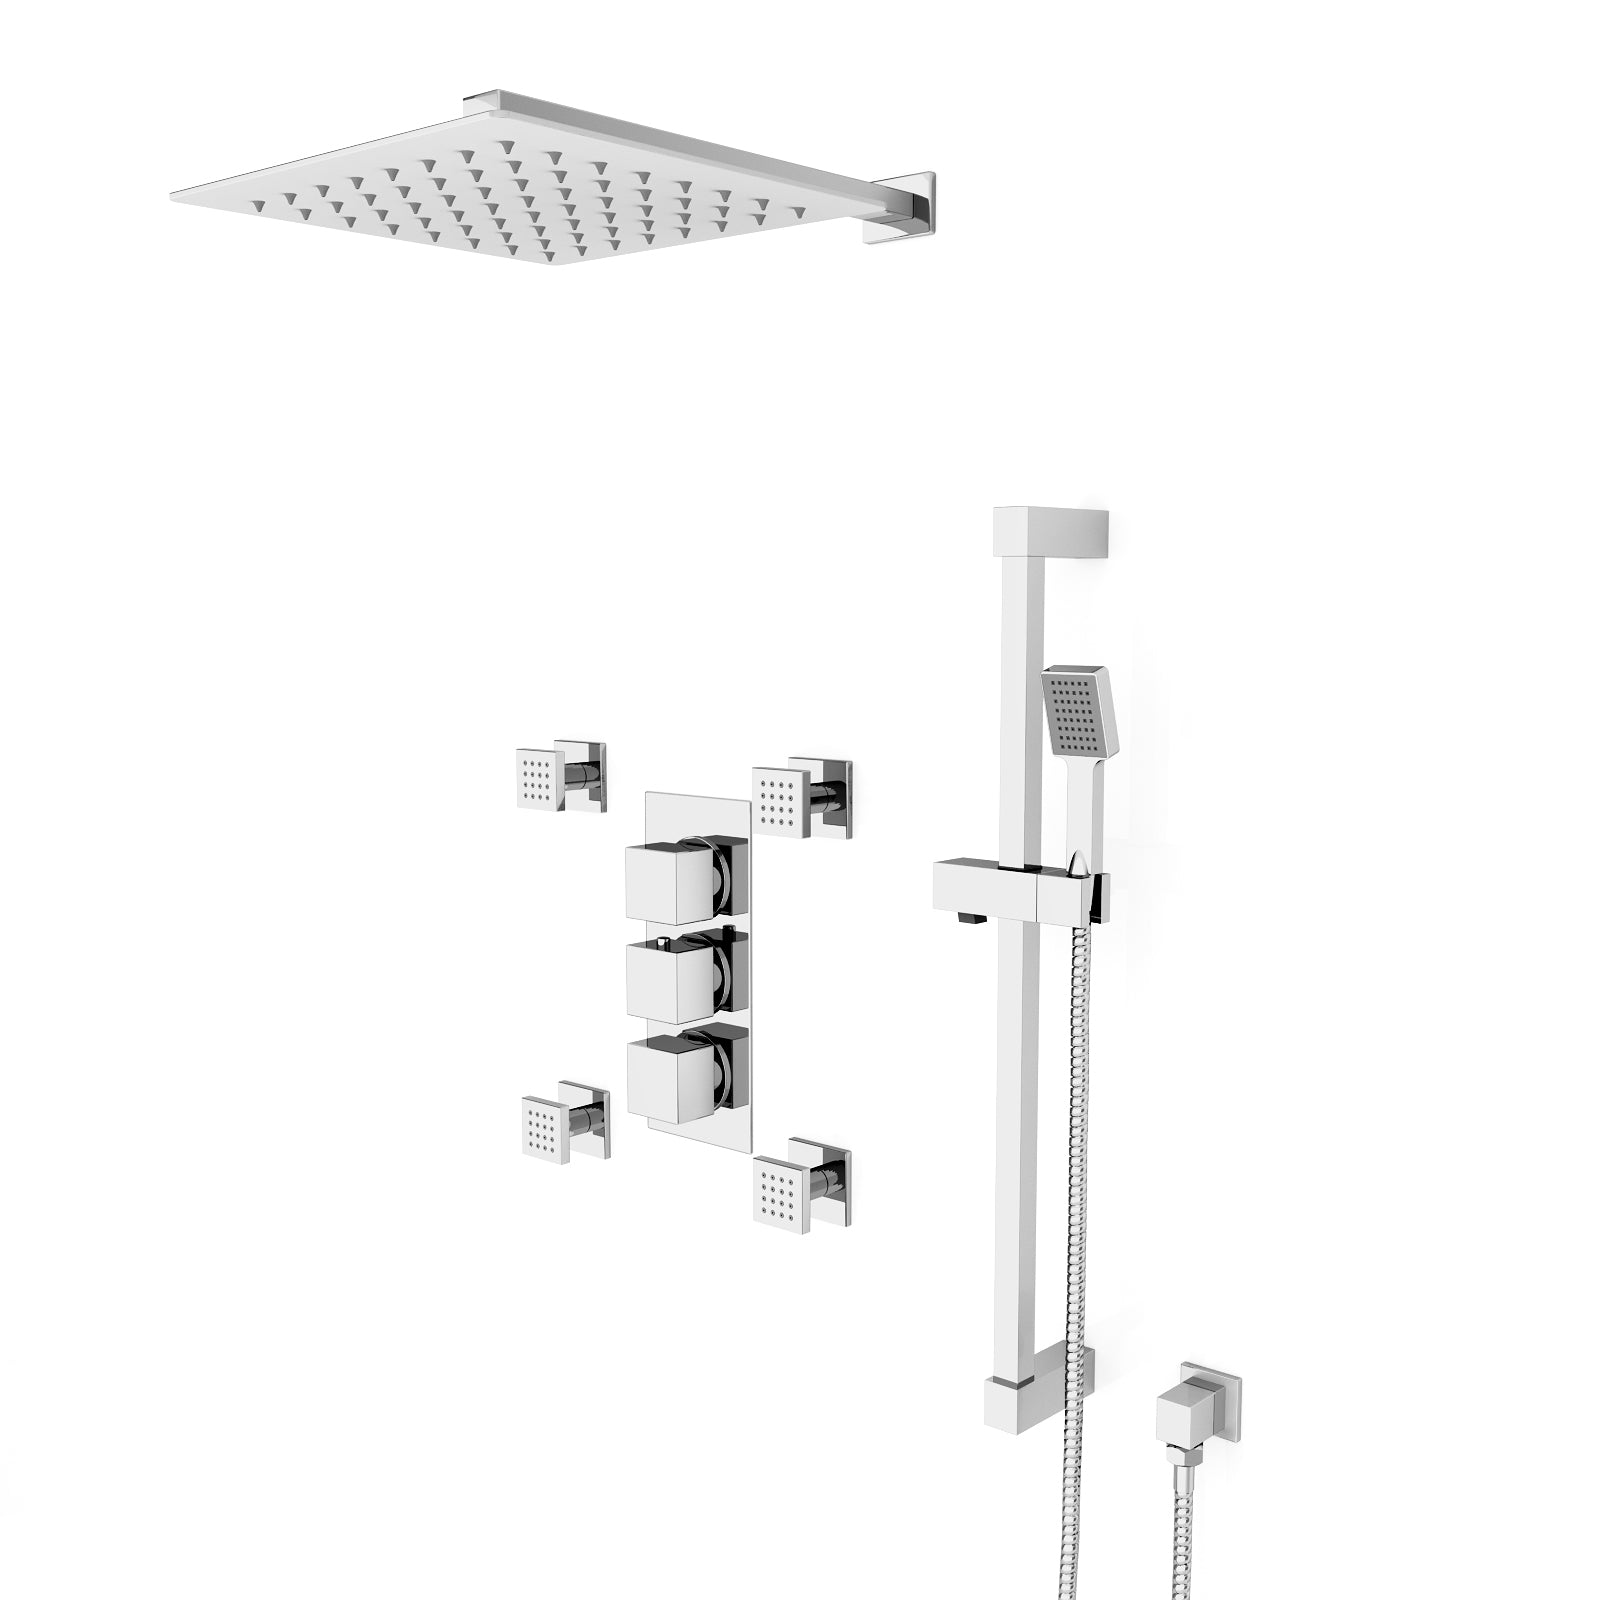 Olive Square 3 Way Concealed Thermostatic Shower Mixer Valve, Wall Shower Head, Handset, Slider Rail, 4x Body Jets Set Chrome